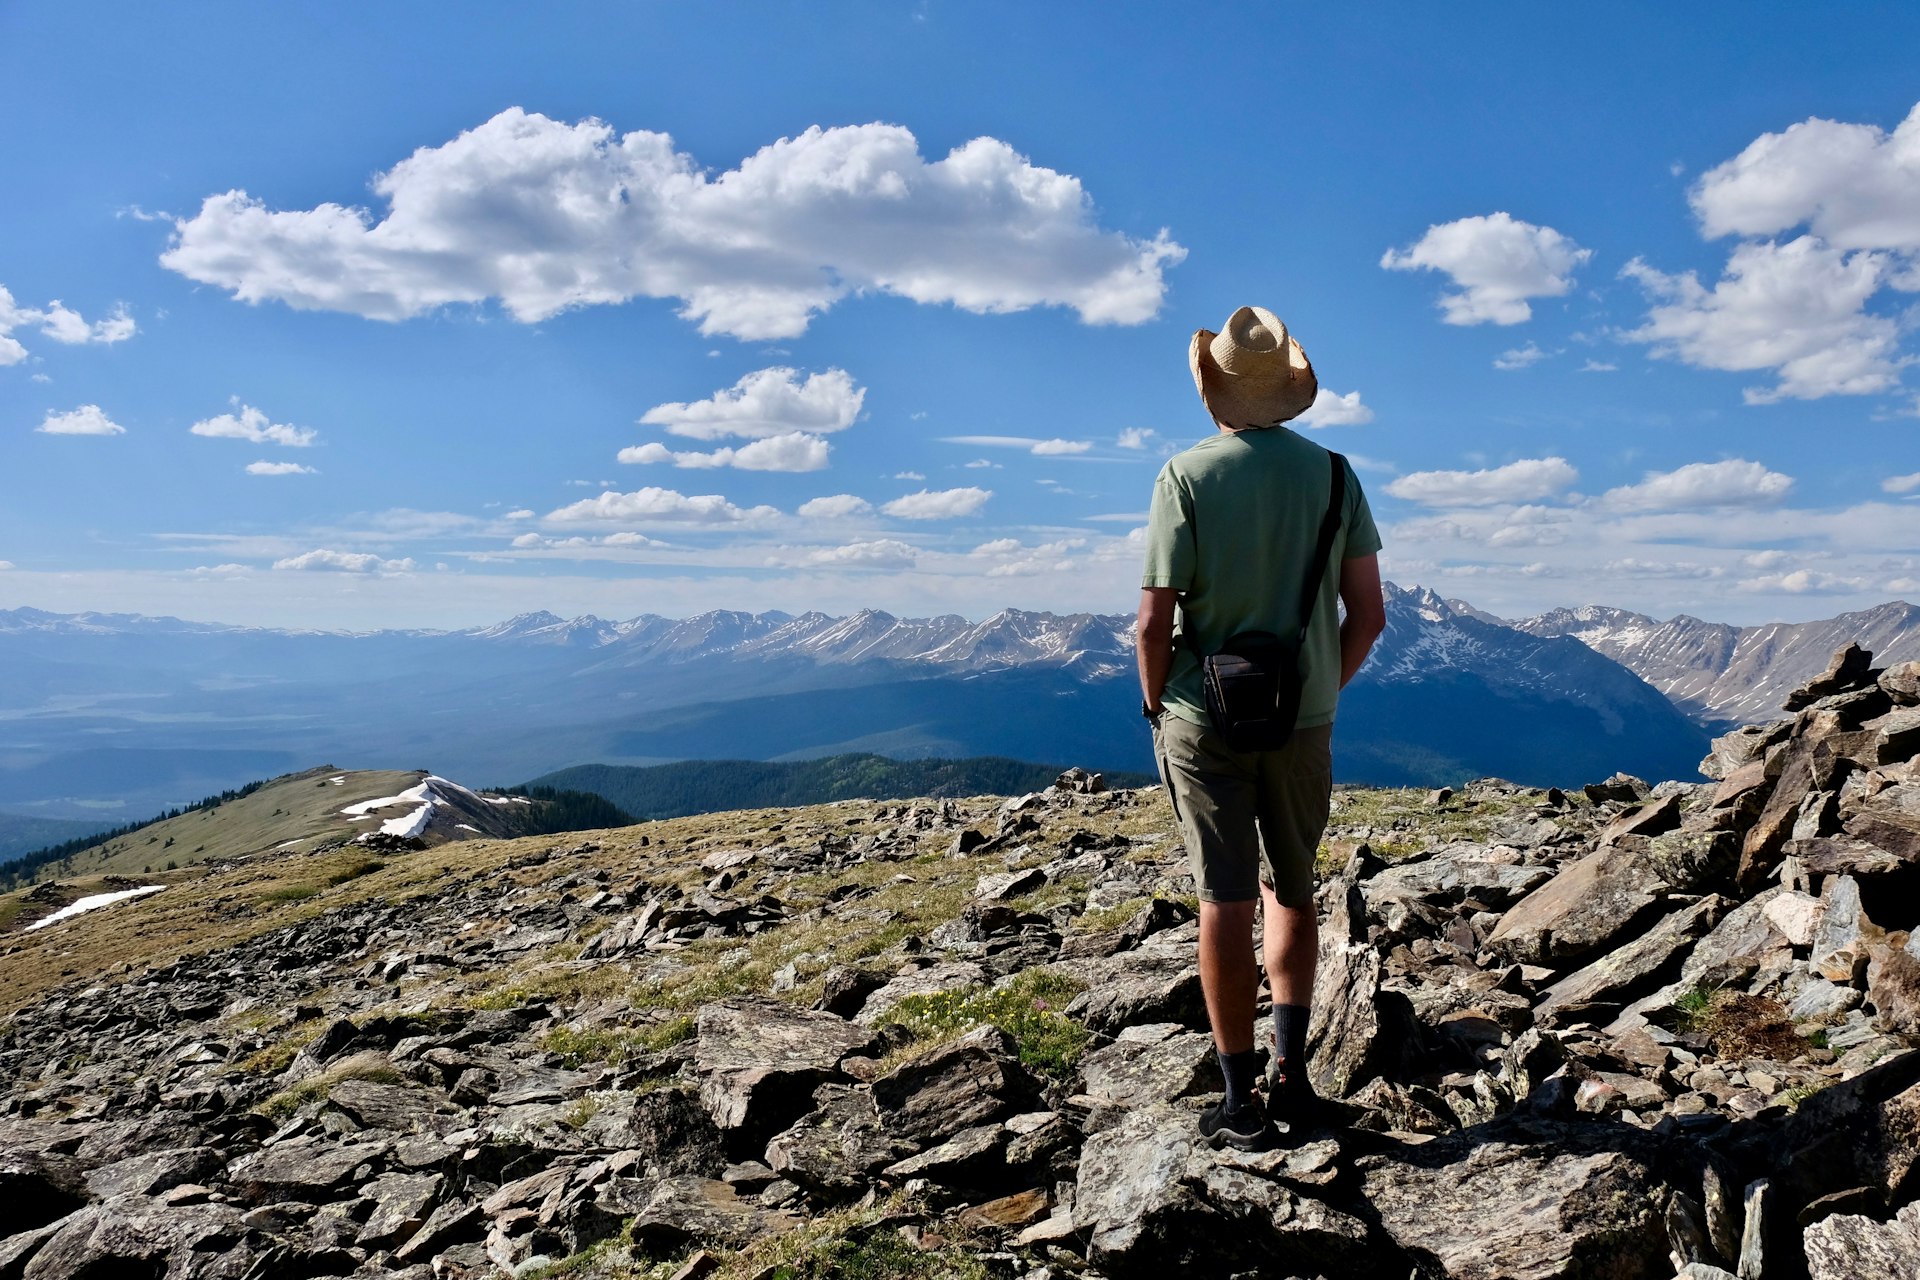 A man in a cowboy hat pausing to admire the views above Aspen, Colorado